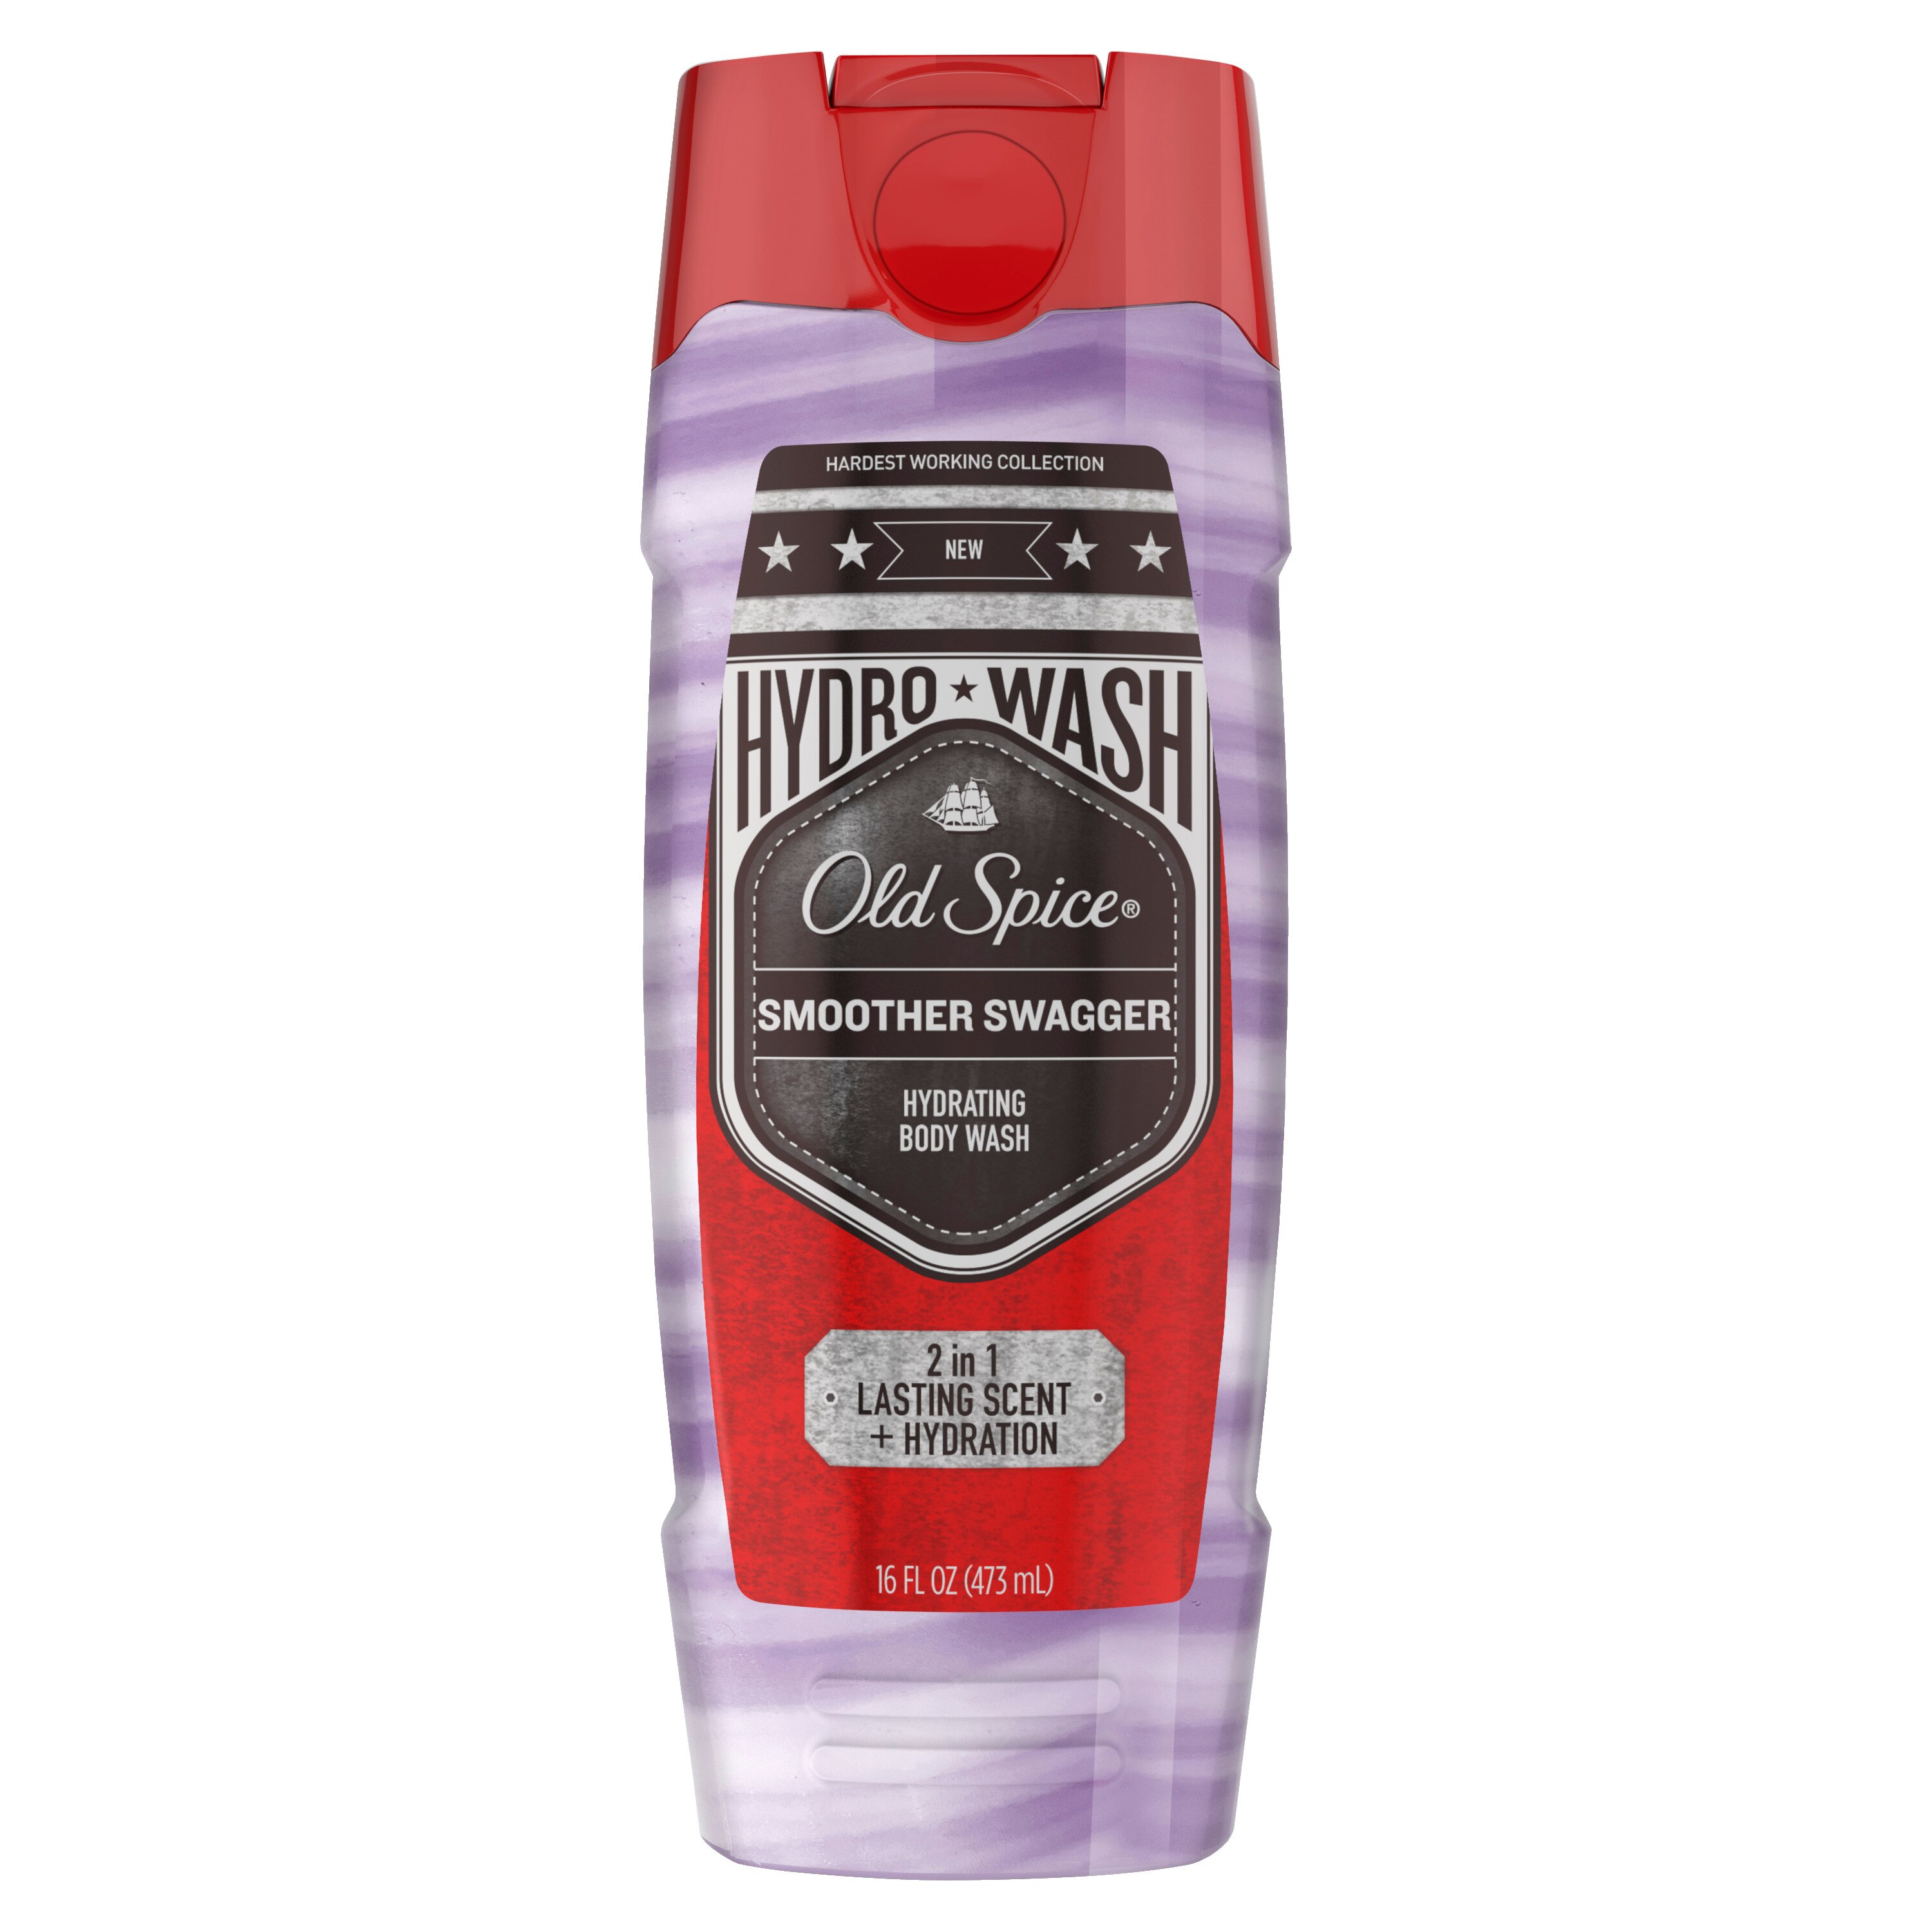 Old Spice Hydro Wash Hydrating Body Wash, Smoother Swagger, 16 OZ